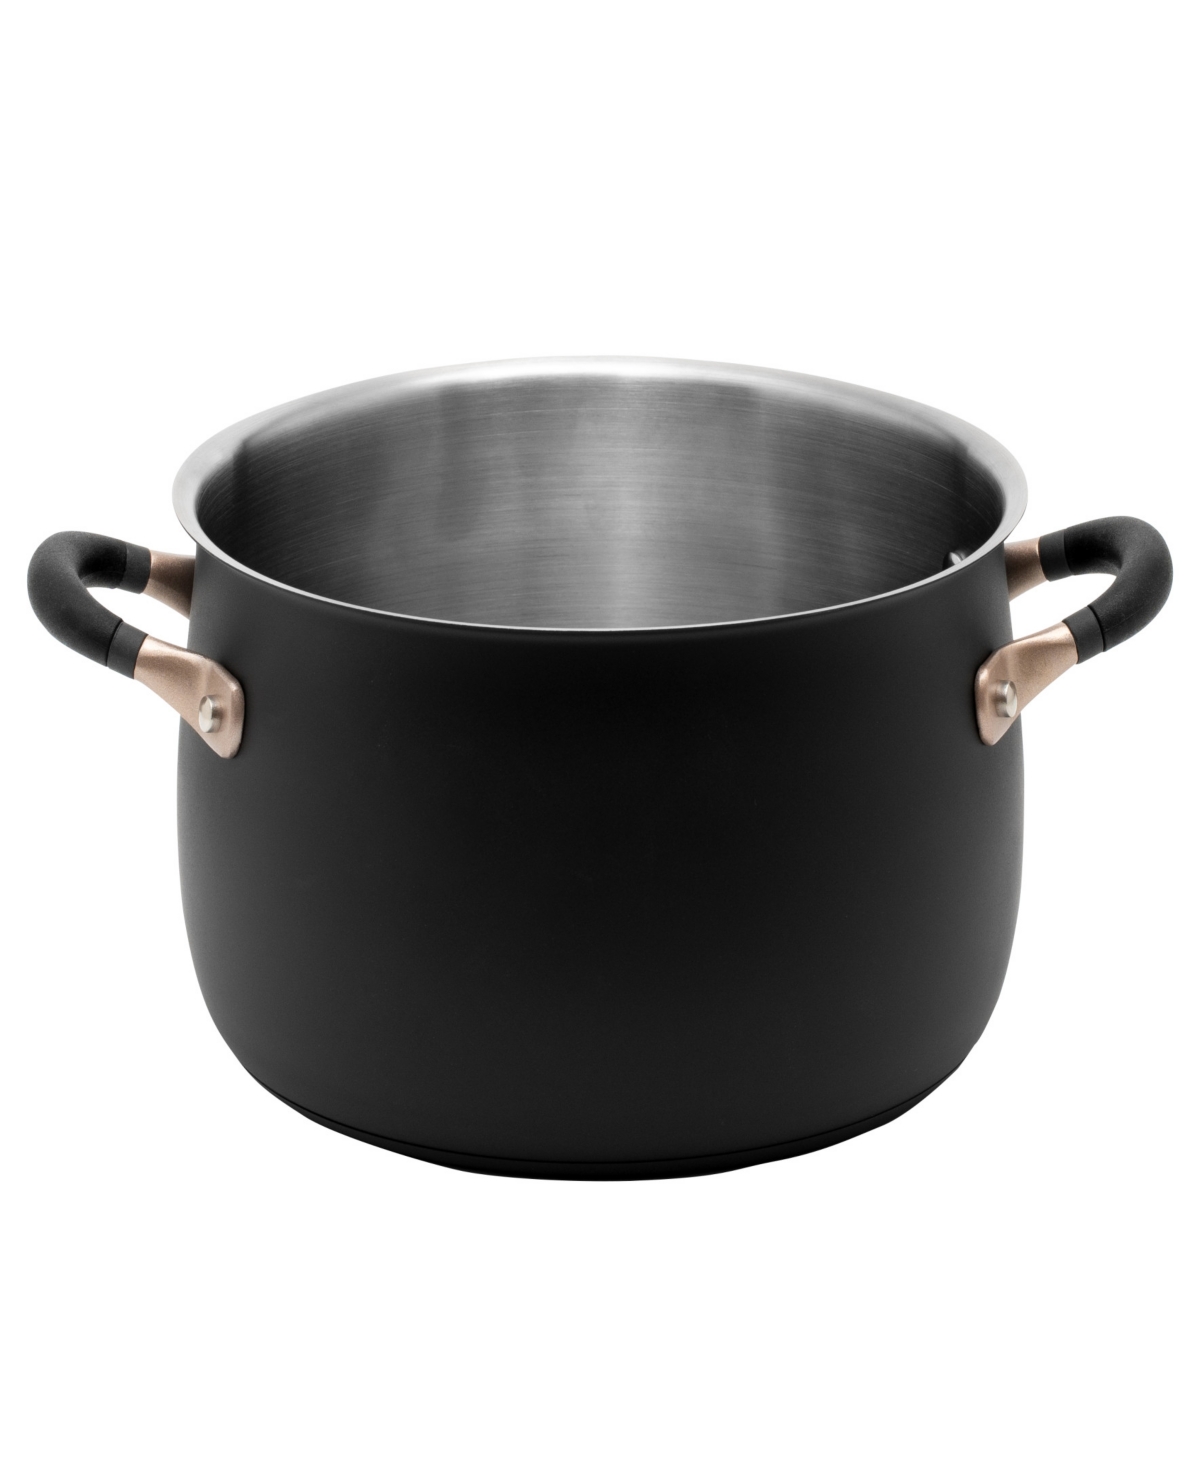 Meyer Accent Series Stainless Steel 6.5-quart Stockpot In Matte Black With Gold Accent